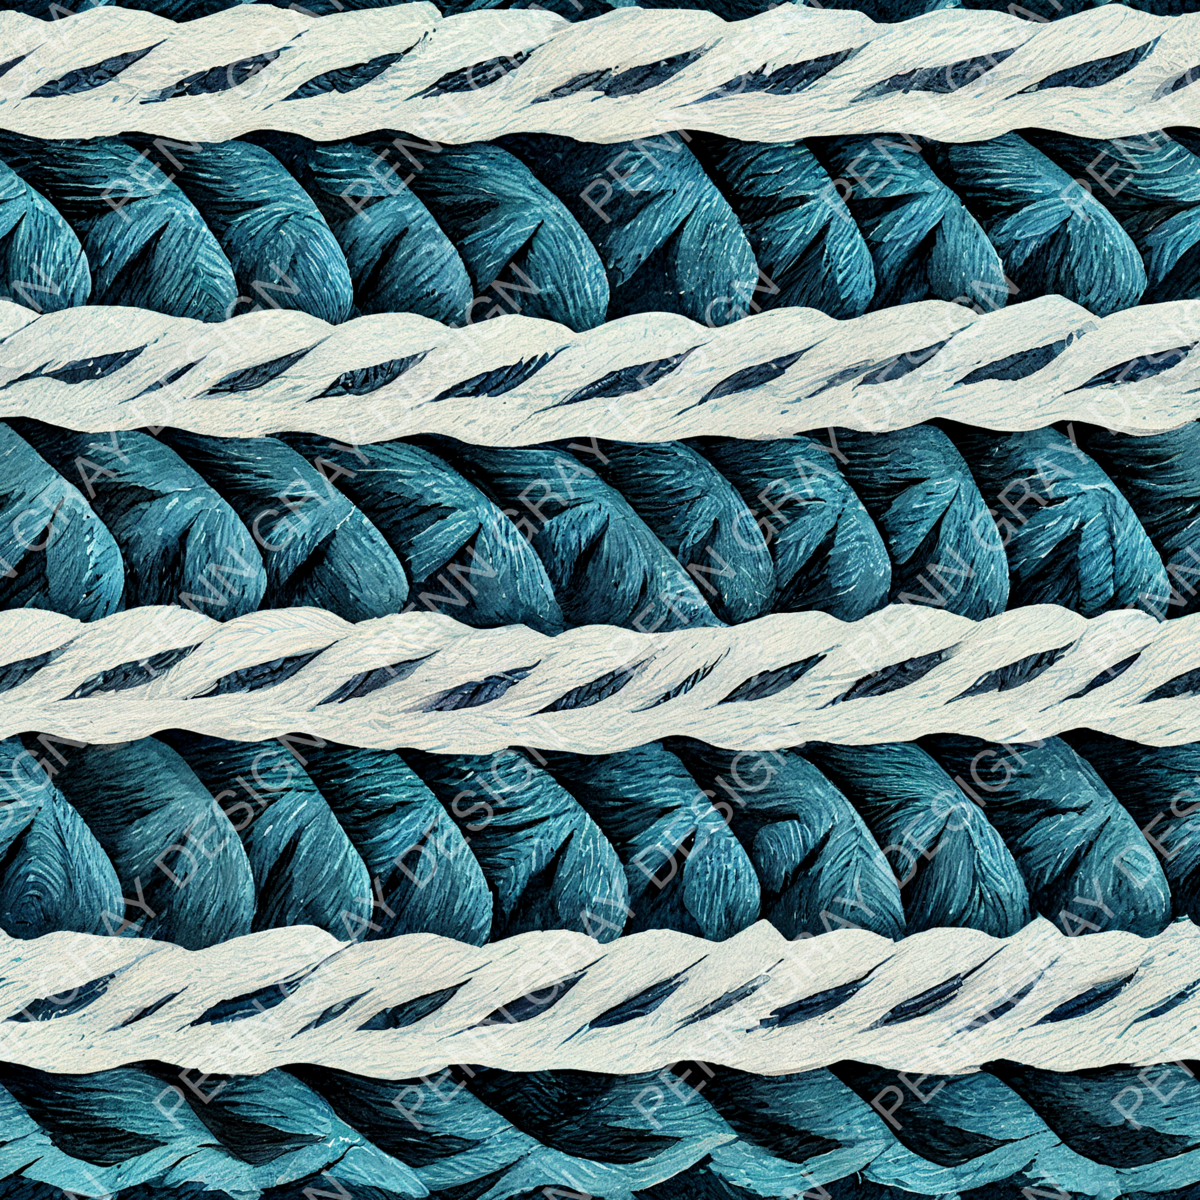 ropes-anchors-04-(watermarked)